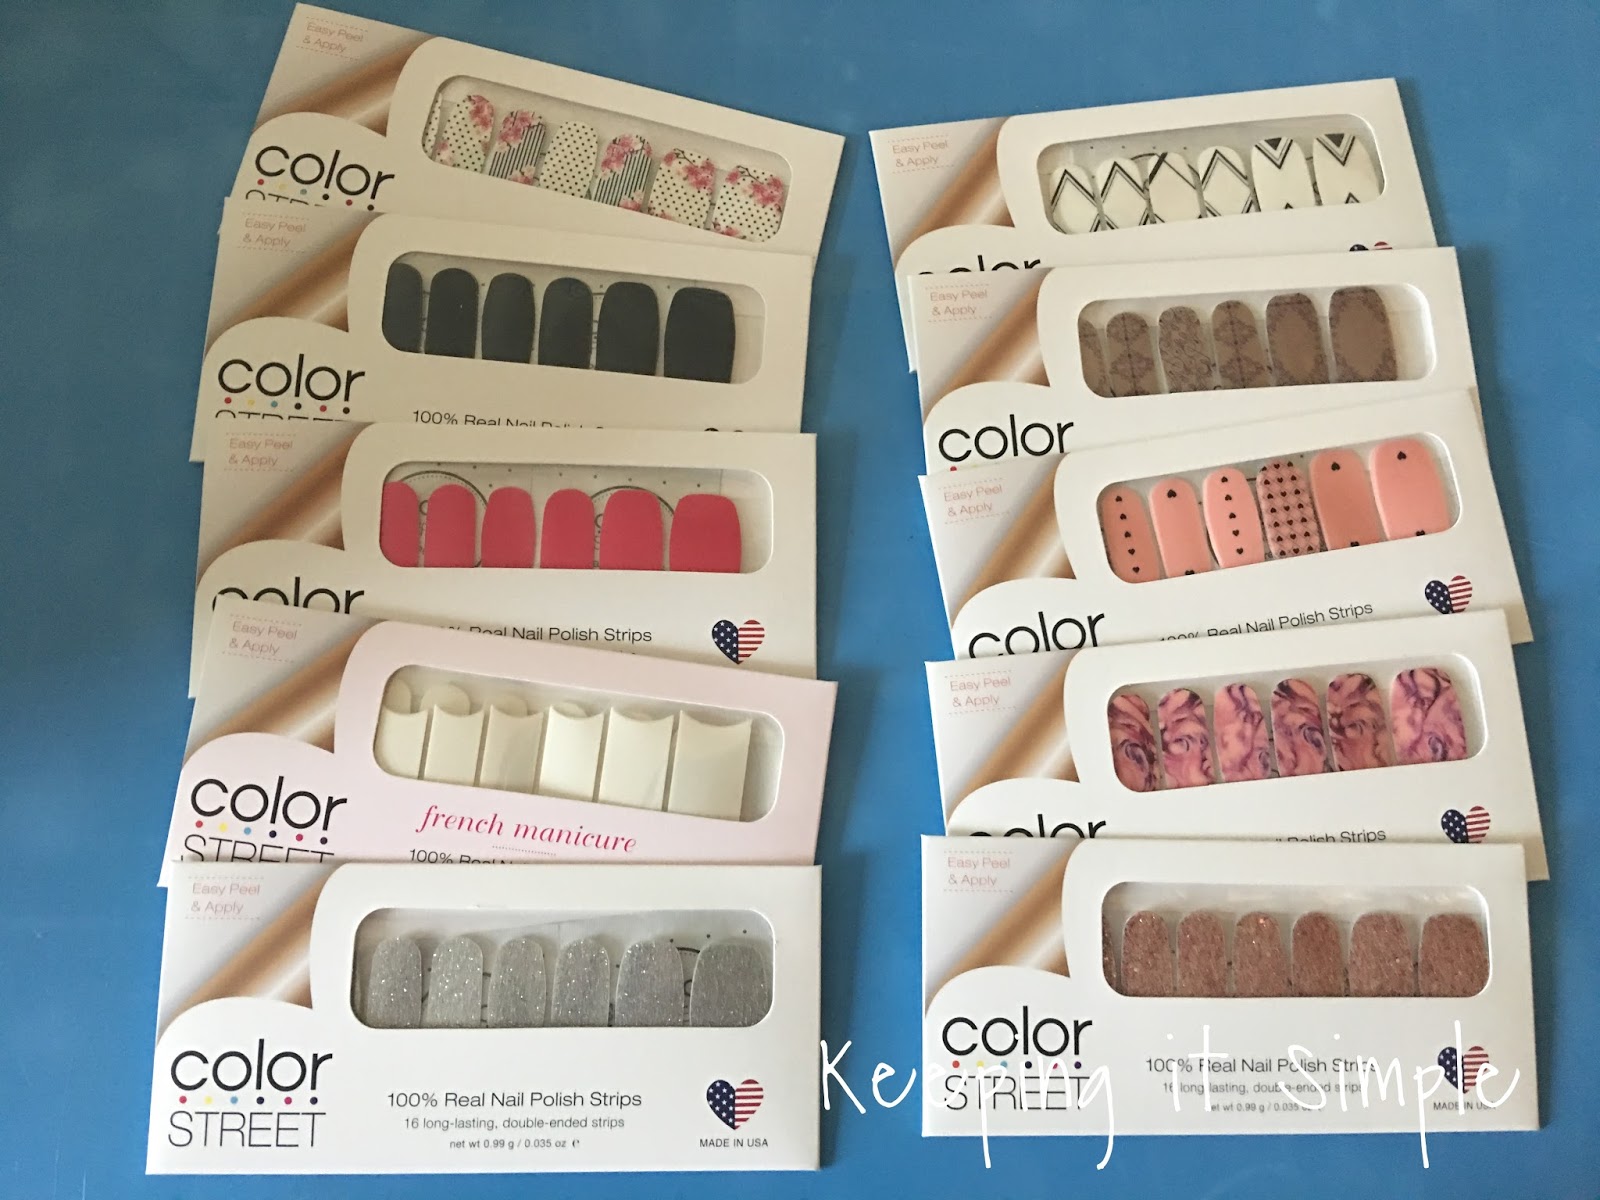 5. Color Street Nail Art: Mixing Colors on One Nail - wide 8